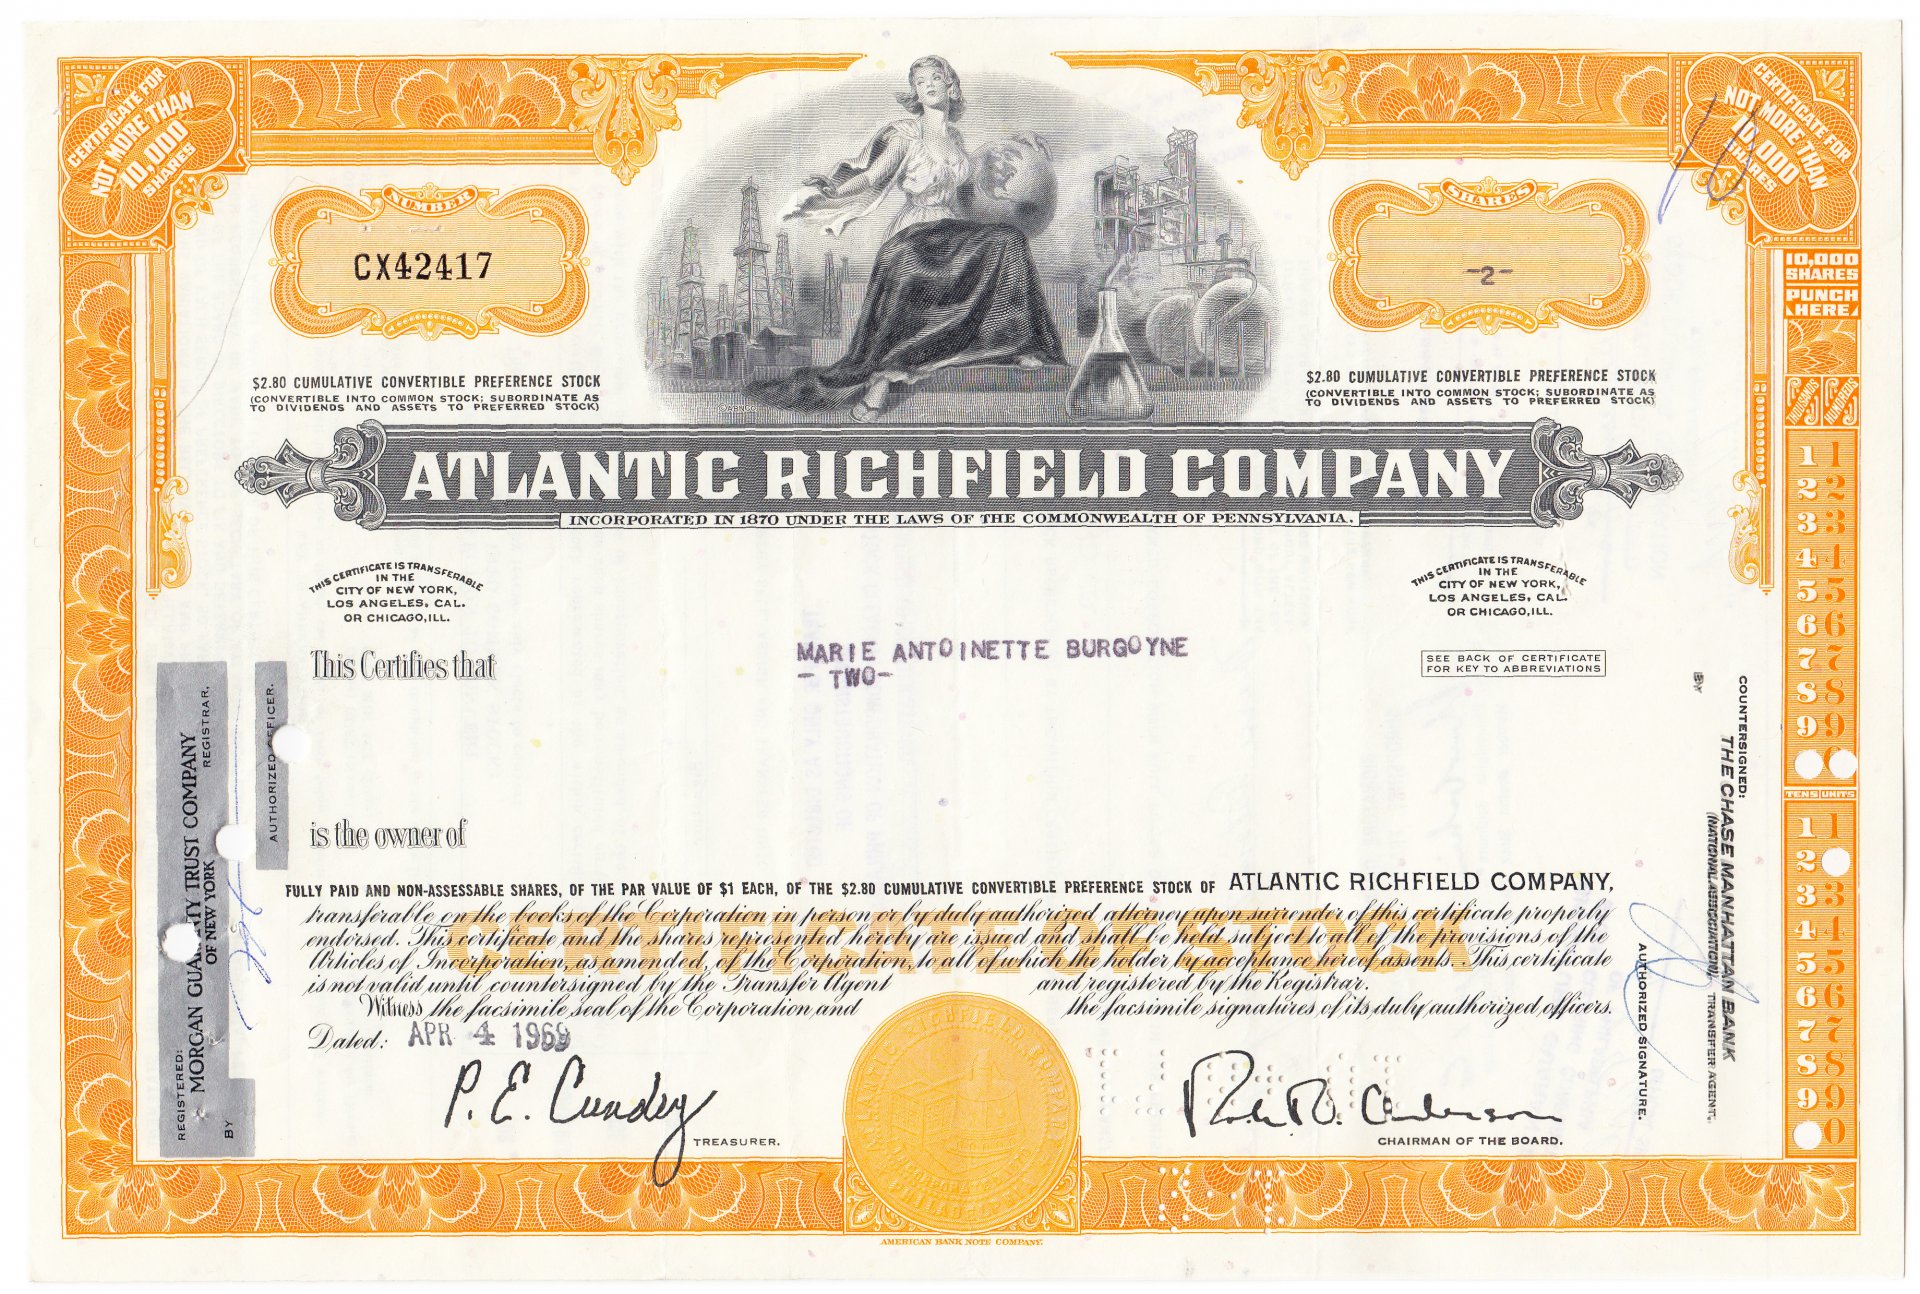 Atlantic Richfield Company. Preference stock Certificates. Us old stock shares.